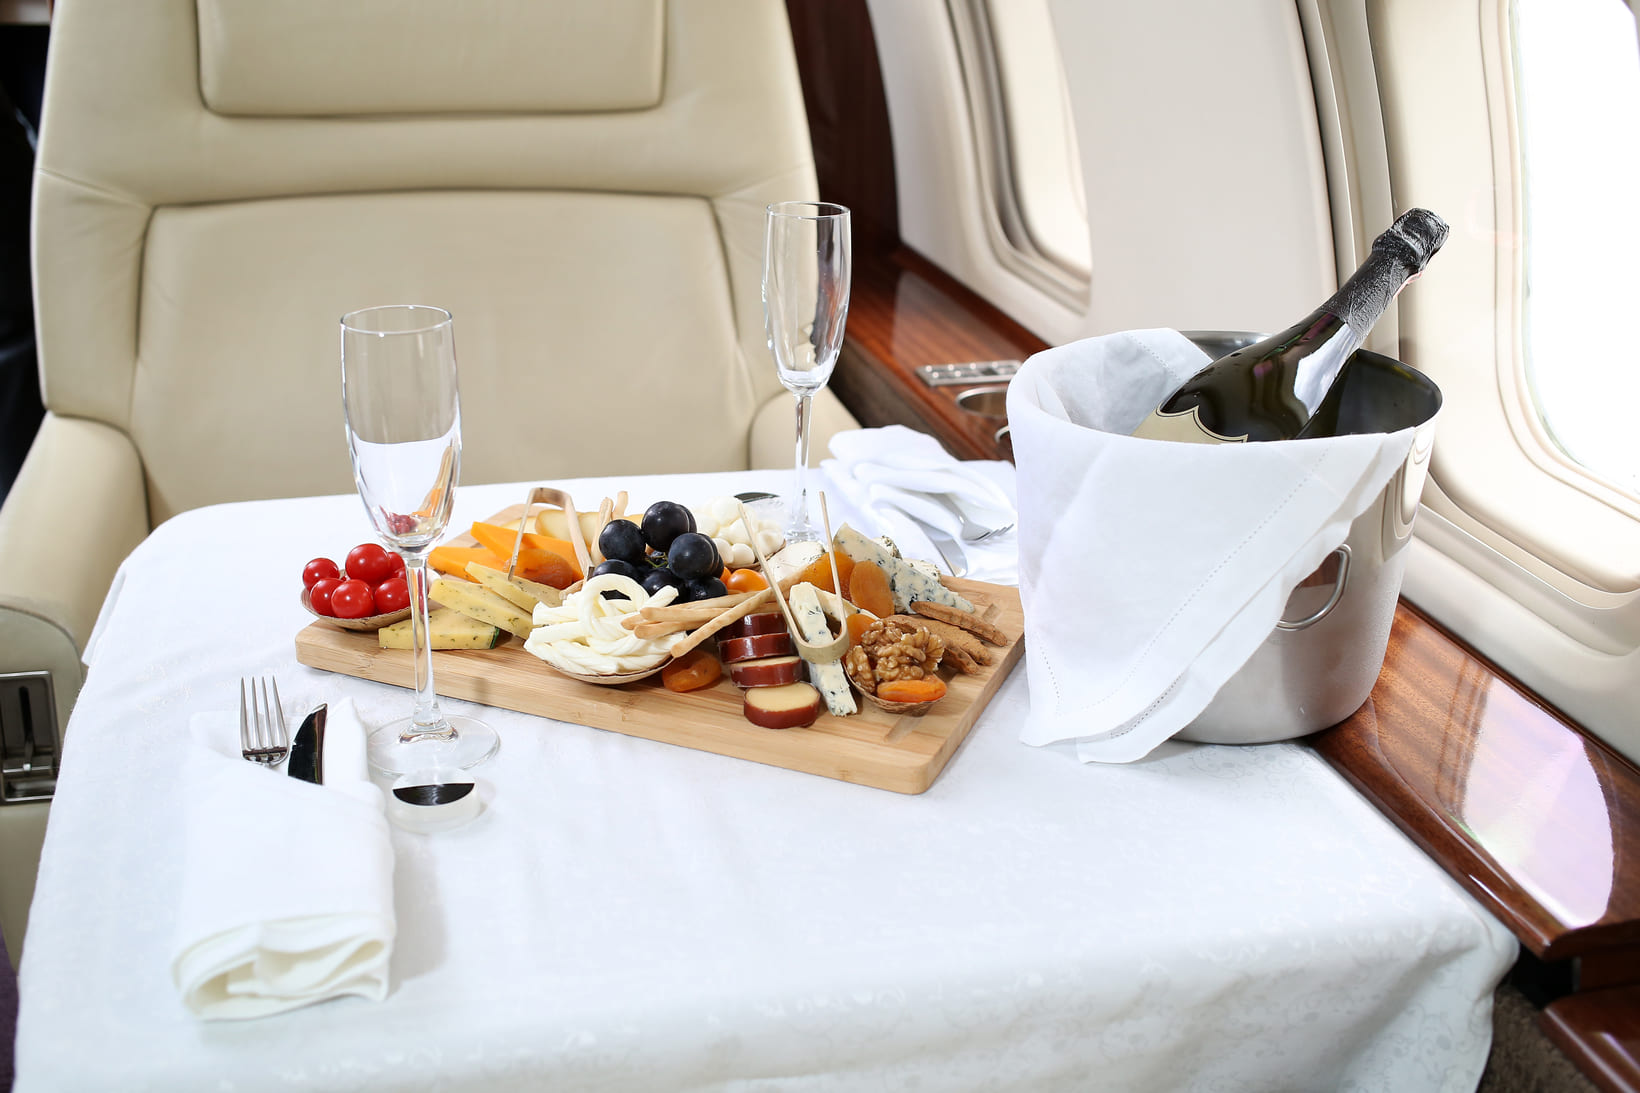 A cheese board served on a private jet flight